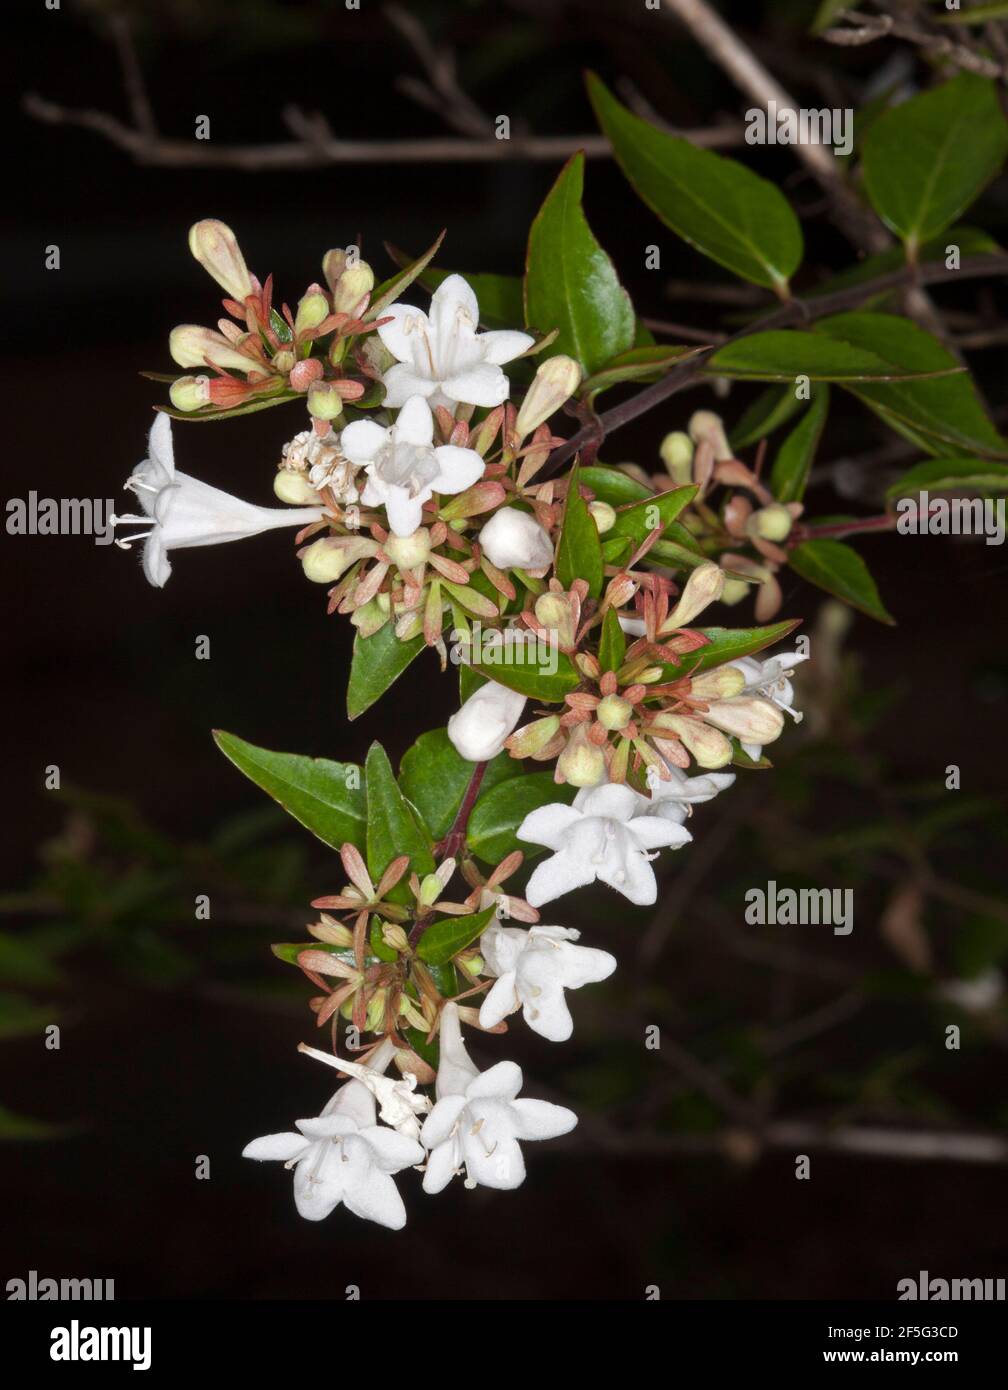 Cluster of white perfumed flowers, buds and green leaves of deciduous garden shrub, Abelia x grandiflora on dark background Stock Photo